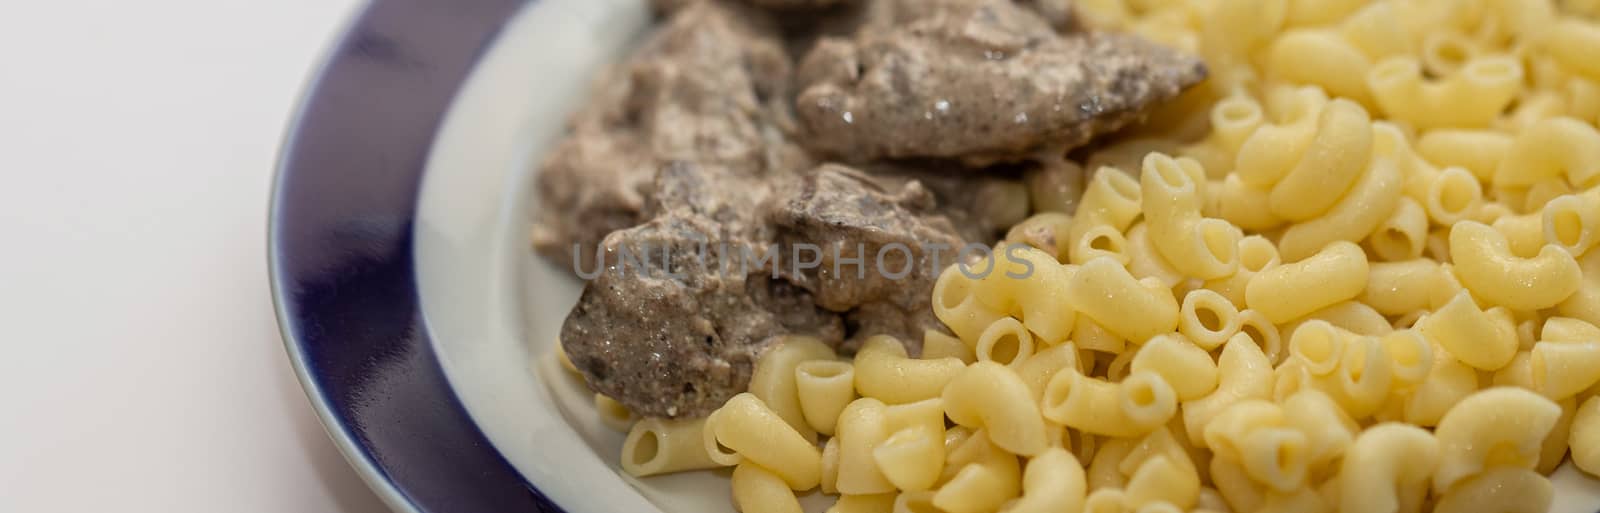 Chicken liver stewed in sour cream and a side dish of pasta in a bowl on a white background, close-up. healthy food, menu concept background